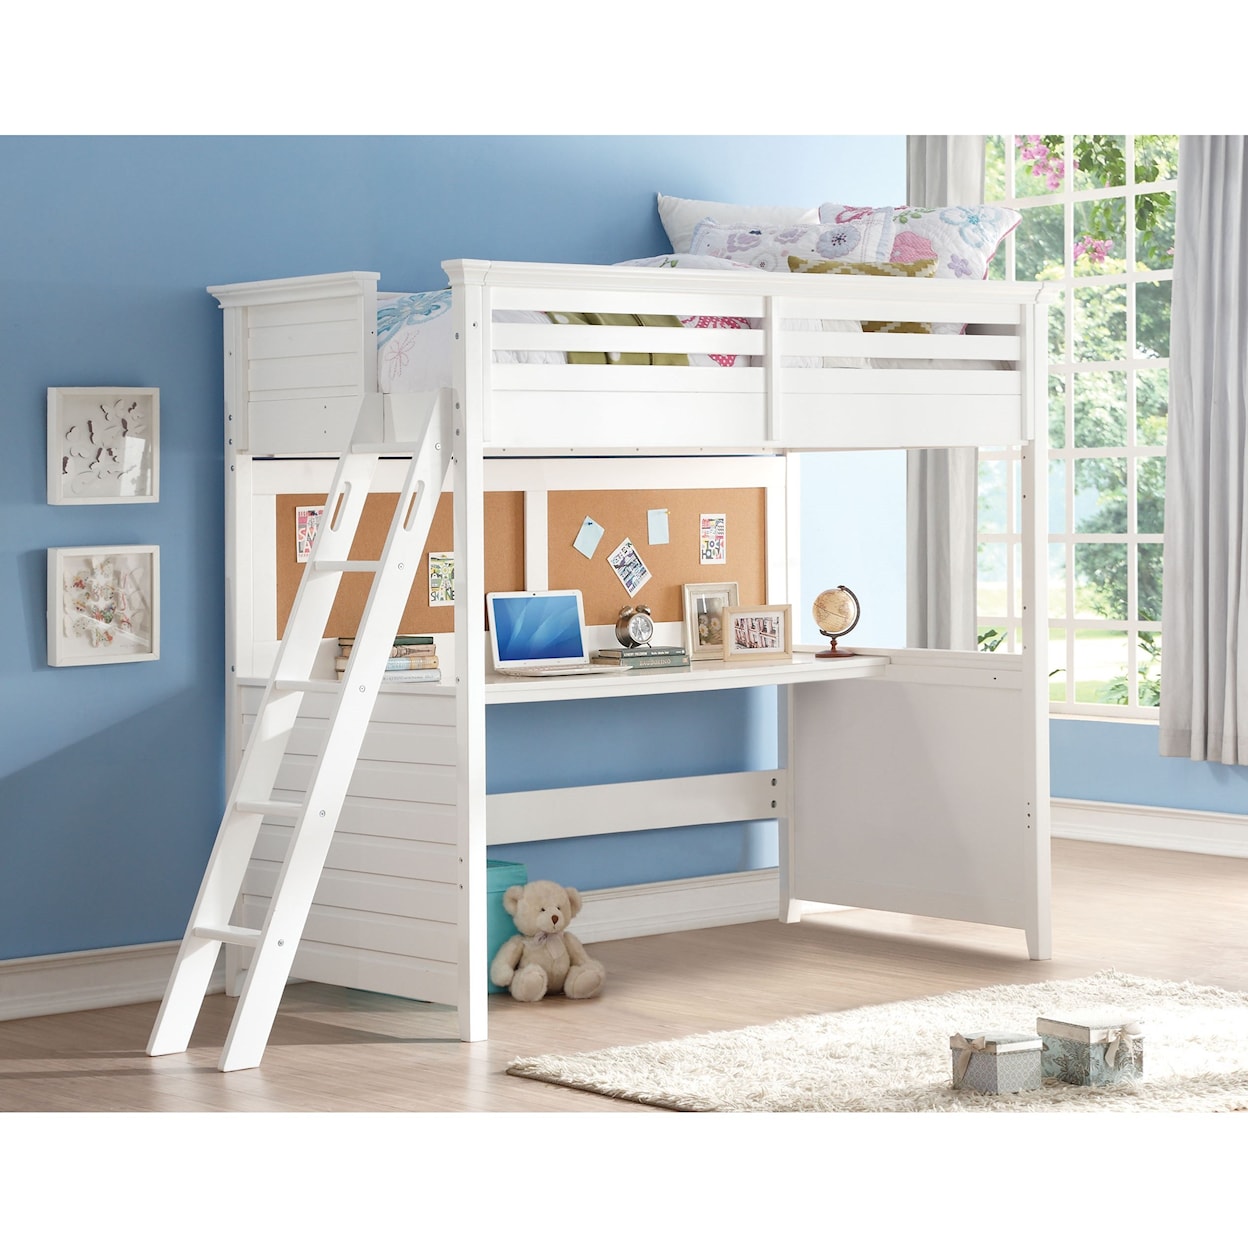 Acme Furniture Lacey Twin Loft Bed